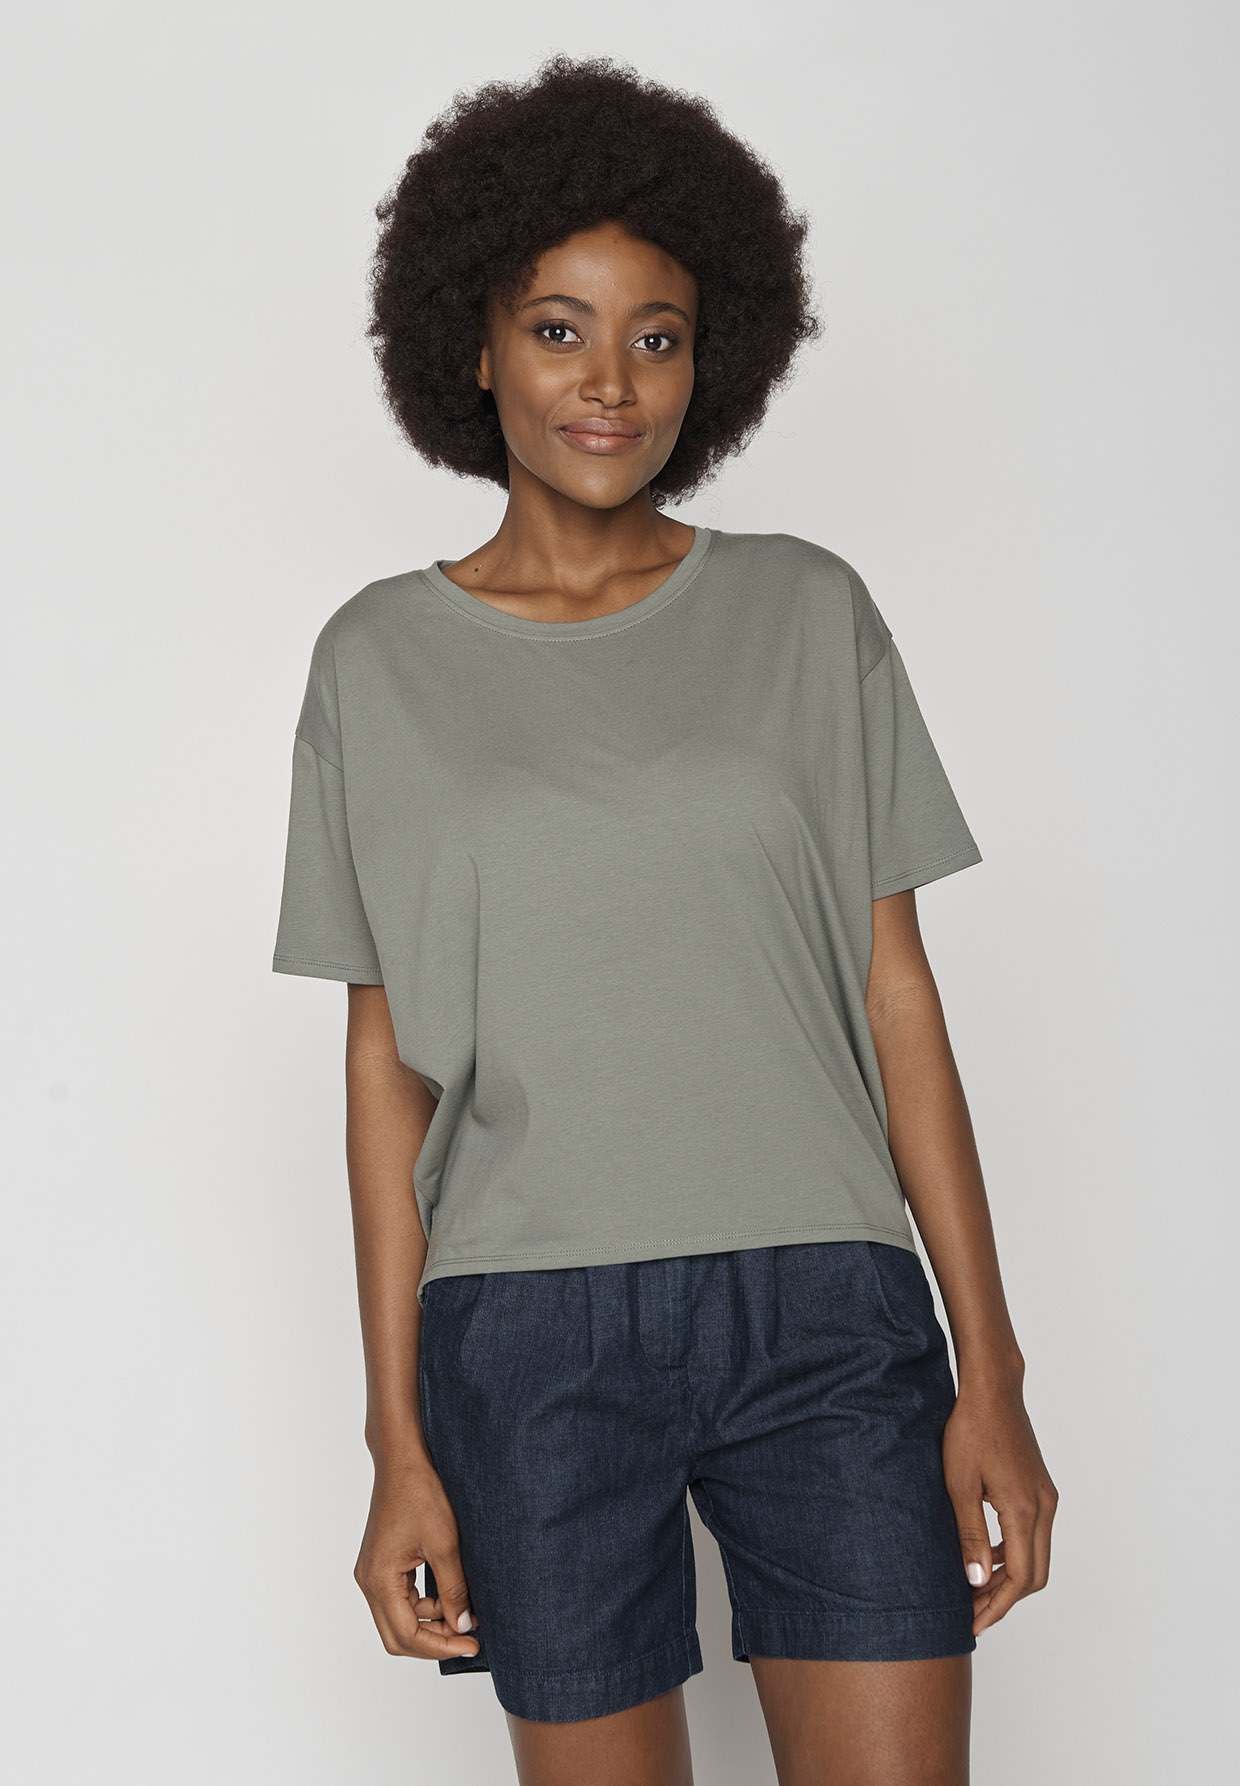 Greenbomb Basic Feel GOTS Shirt - Olive-Womens-Ohh! By Gum - Shop Sustainable